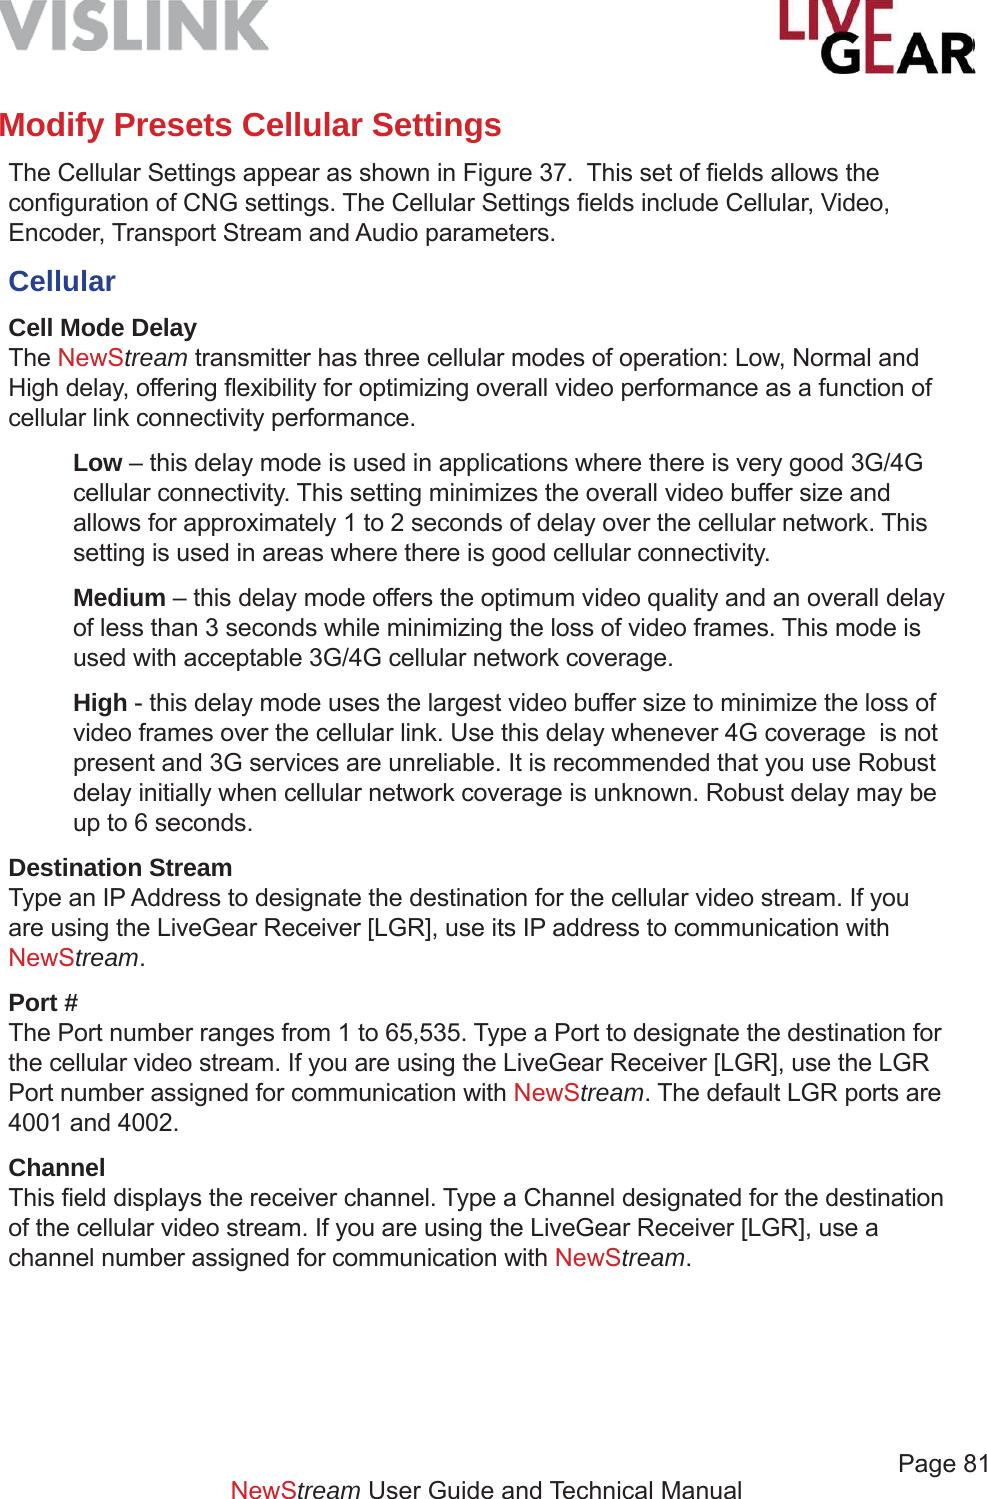             Page 81NewStream User Guide and Technical ManualModify Presets Cellular SettingsThe Cellular Settings appear as shown in Figure 37.  This set of ﬁ elds allows the conﬁ guration of CNG settings. The Cellular Settings ﬁ elds include Cellular, Video, Encoder, Transport Stream and Audio parameters.Cellular Cell Mode DelayThe NewStream transmitter has three cellular modes of operation: Low, Normal and High delay, offering ﬂ exibility for optimizing overall video performance as a function of cellular link connectivity performance.Low – this delay mode is used in applications where there is very good 3G/4G cellular connectivity. This setting minimizes the overall video buffer size and allows for approximately 1 to 2 seconds of delay over the cellular network. This setting is used in areas where there is good cellular connectivity. Medium – this delay mode offers the optimum video quality and an overall delay of less than 3 seconds while minimizing the loss of video frames. This mode is used with acceptable 3G/4G cellular network coverage. High - this delay mode uses the largest video buffer size to minimize the loss of video frames over the cellular link. Use this delay whenever 4G coverage  is not present and 3G services are unreliable. It is recommended that you use Robust delay initially when cellular network coverage is unknown. Robust delay may be up to 6 seconds.Destination StreamType an IP Address to designate the destination for the cellular video stream. If you are using the LiveGear Receiver [LGR], use its IP address to communication with NewStream. Port #The Port number ranges from 1 to 65,535. Type a Port to designate the destination for the cellular video stream. If you are using the LiveGear Receiver [LGR], use the LGR Port number assigned for communication with NewStream. The default LGR ports are 4001 and 4002.ChannelThis ﬁ eld displays the receiver channel. Type a Channel designated for the destination of the cellular video stream. If you are using the LiveGear Receiver [LGR], use a channel number assigned for communication with NewStream.